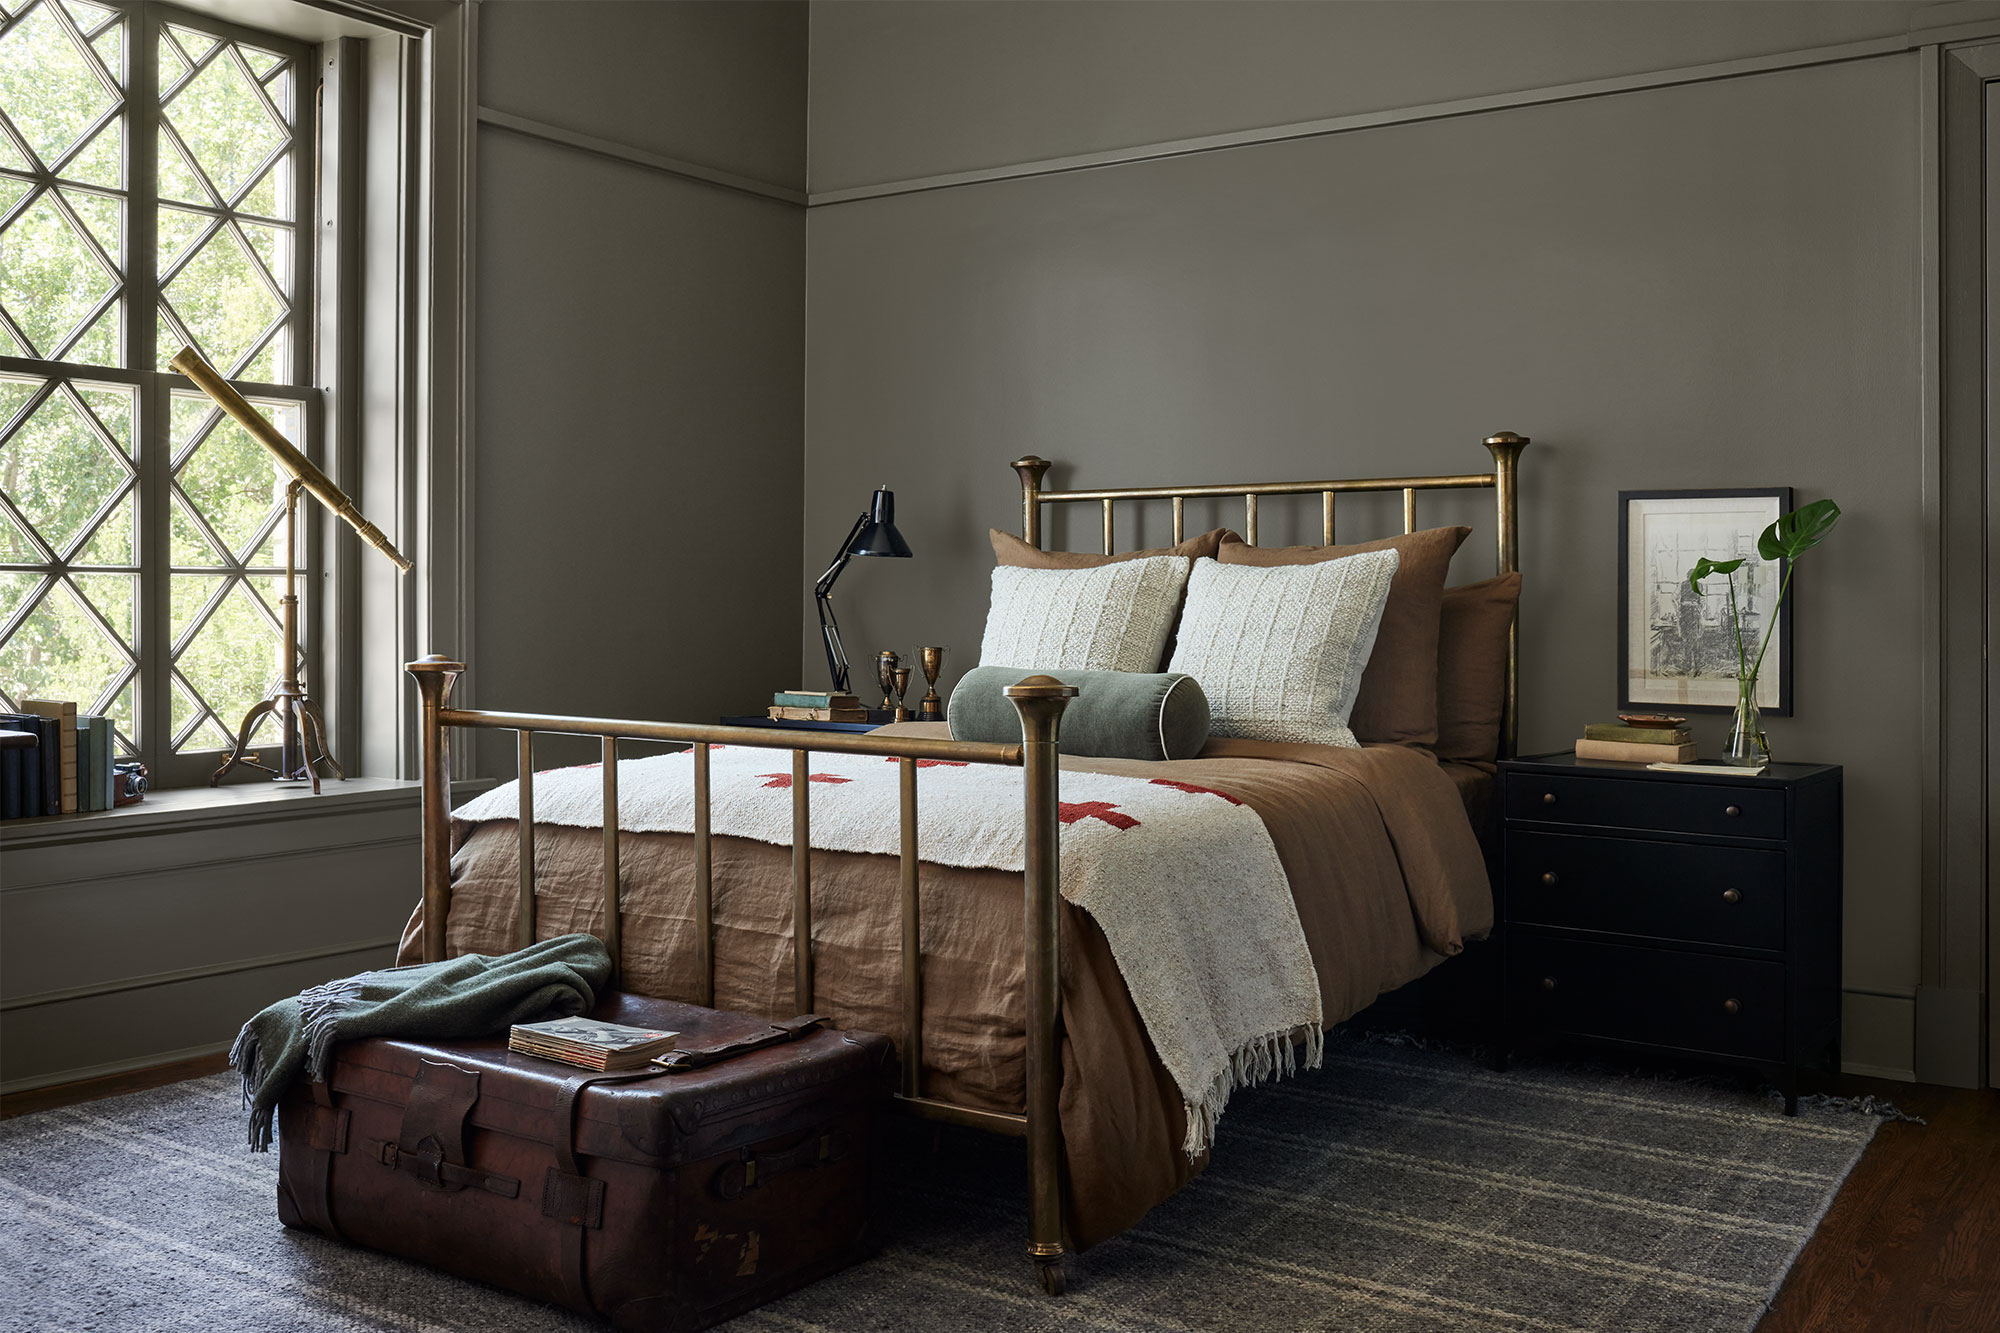 Bedroom with gold bed frame and brown bedding. Dark and masculine decor accents. Dark Green/Gray wall paint.